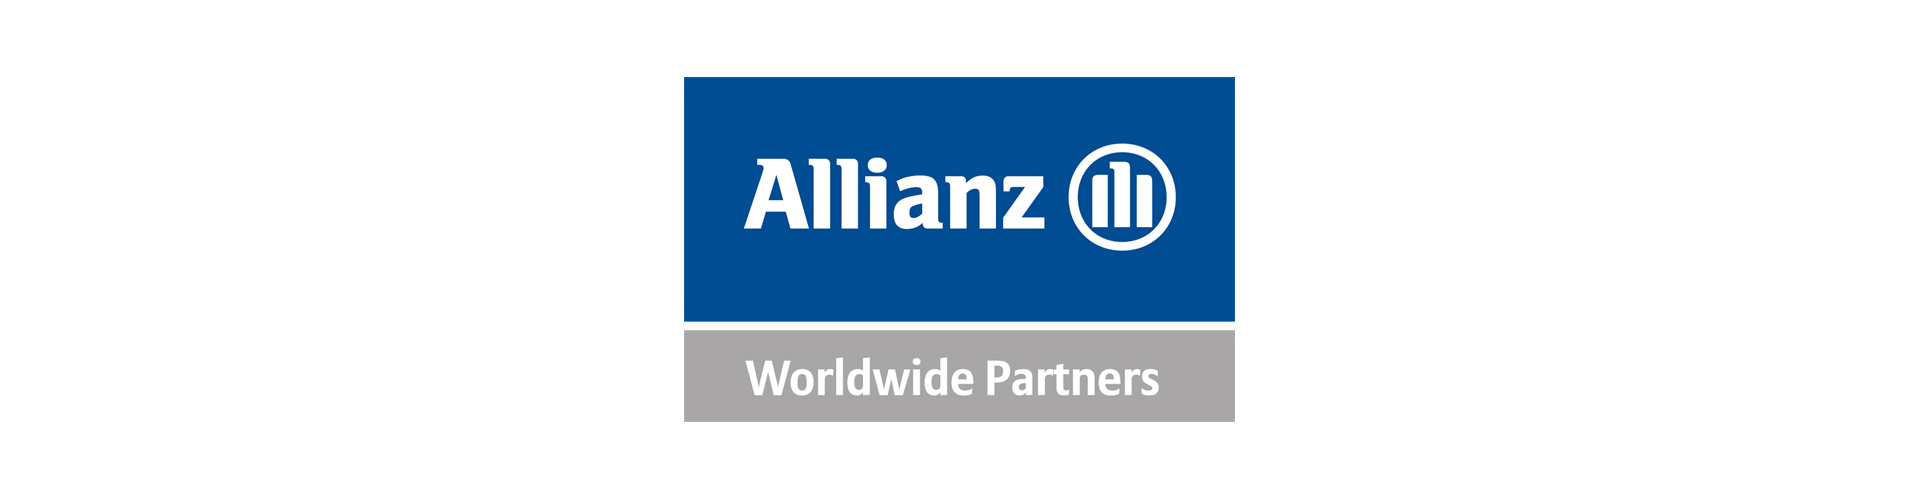 Hood Group enters deal with Allianz worldwide partners and signs new contract with Legal & General